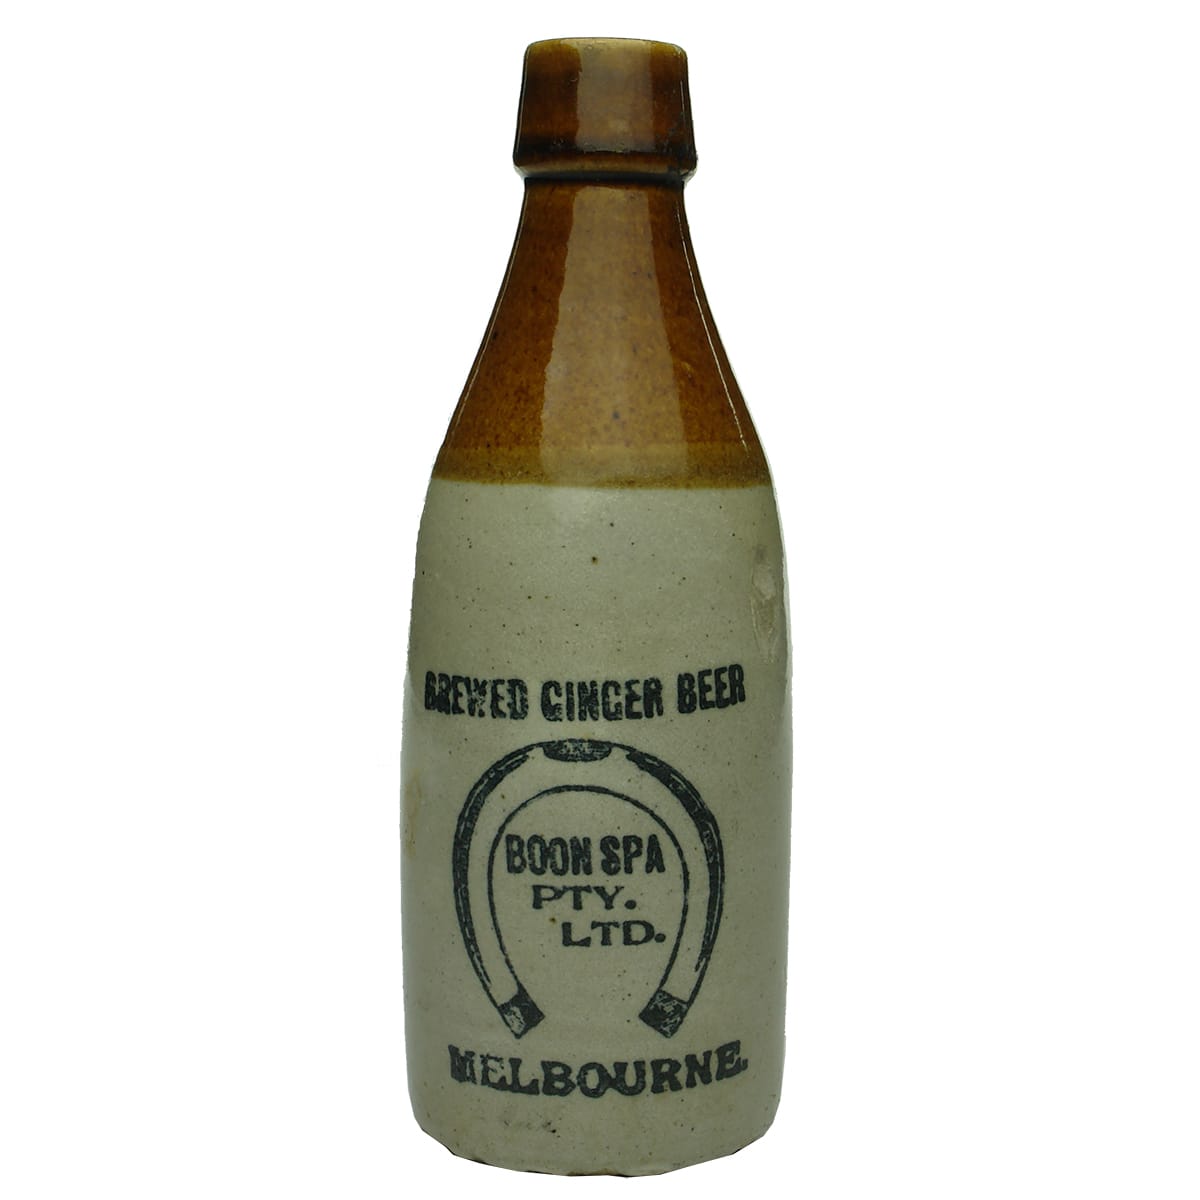 Ginger Beer. Boon Spa, Melbourne. Champagne. Tan Top. Cork Stopper. 10 oz. (Victoria)